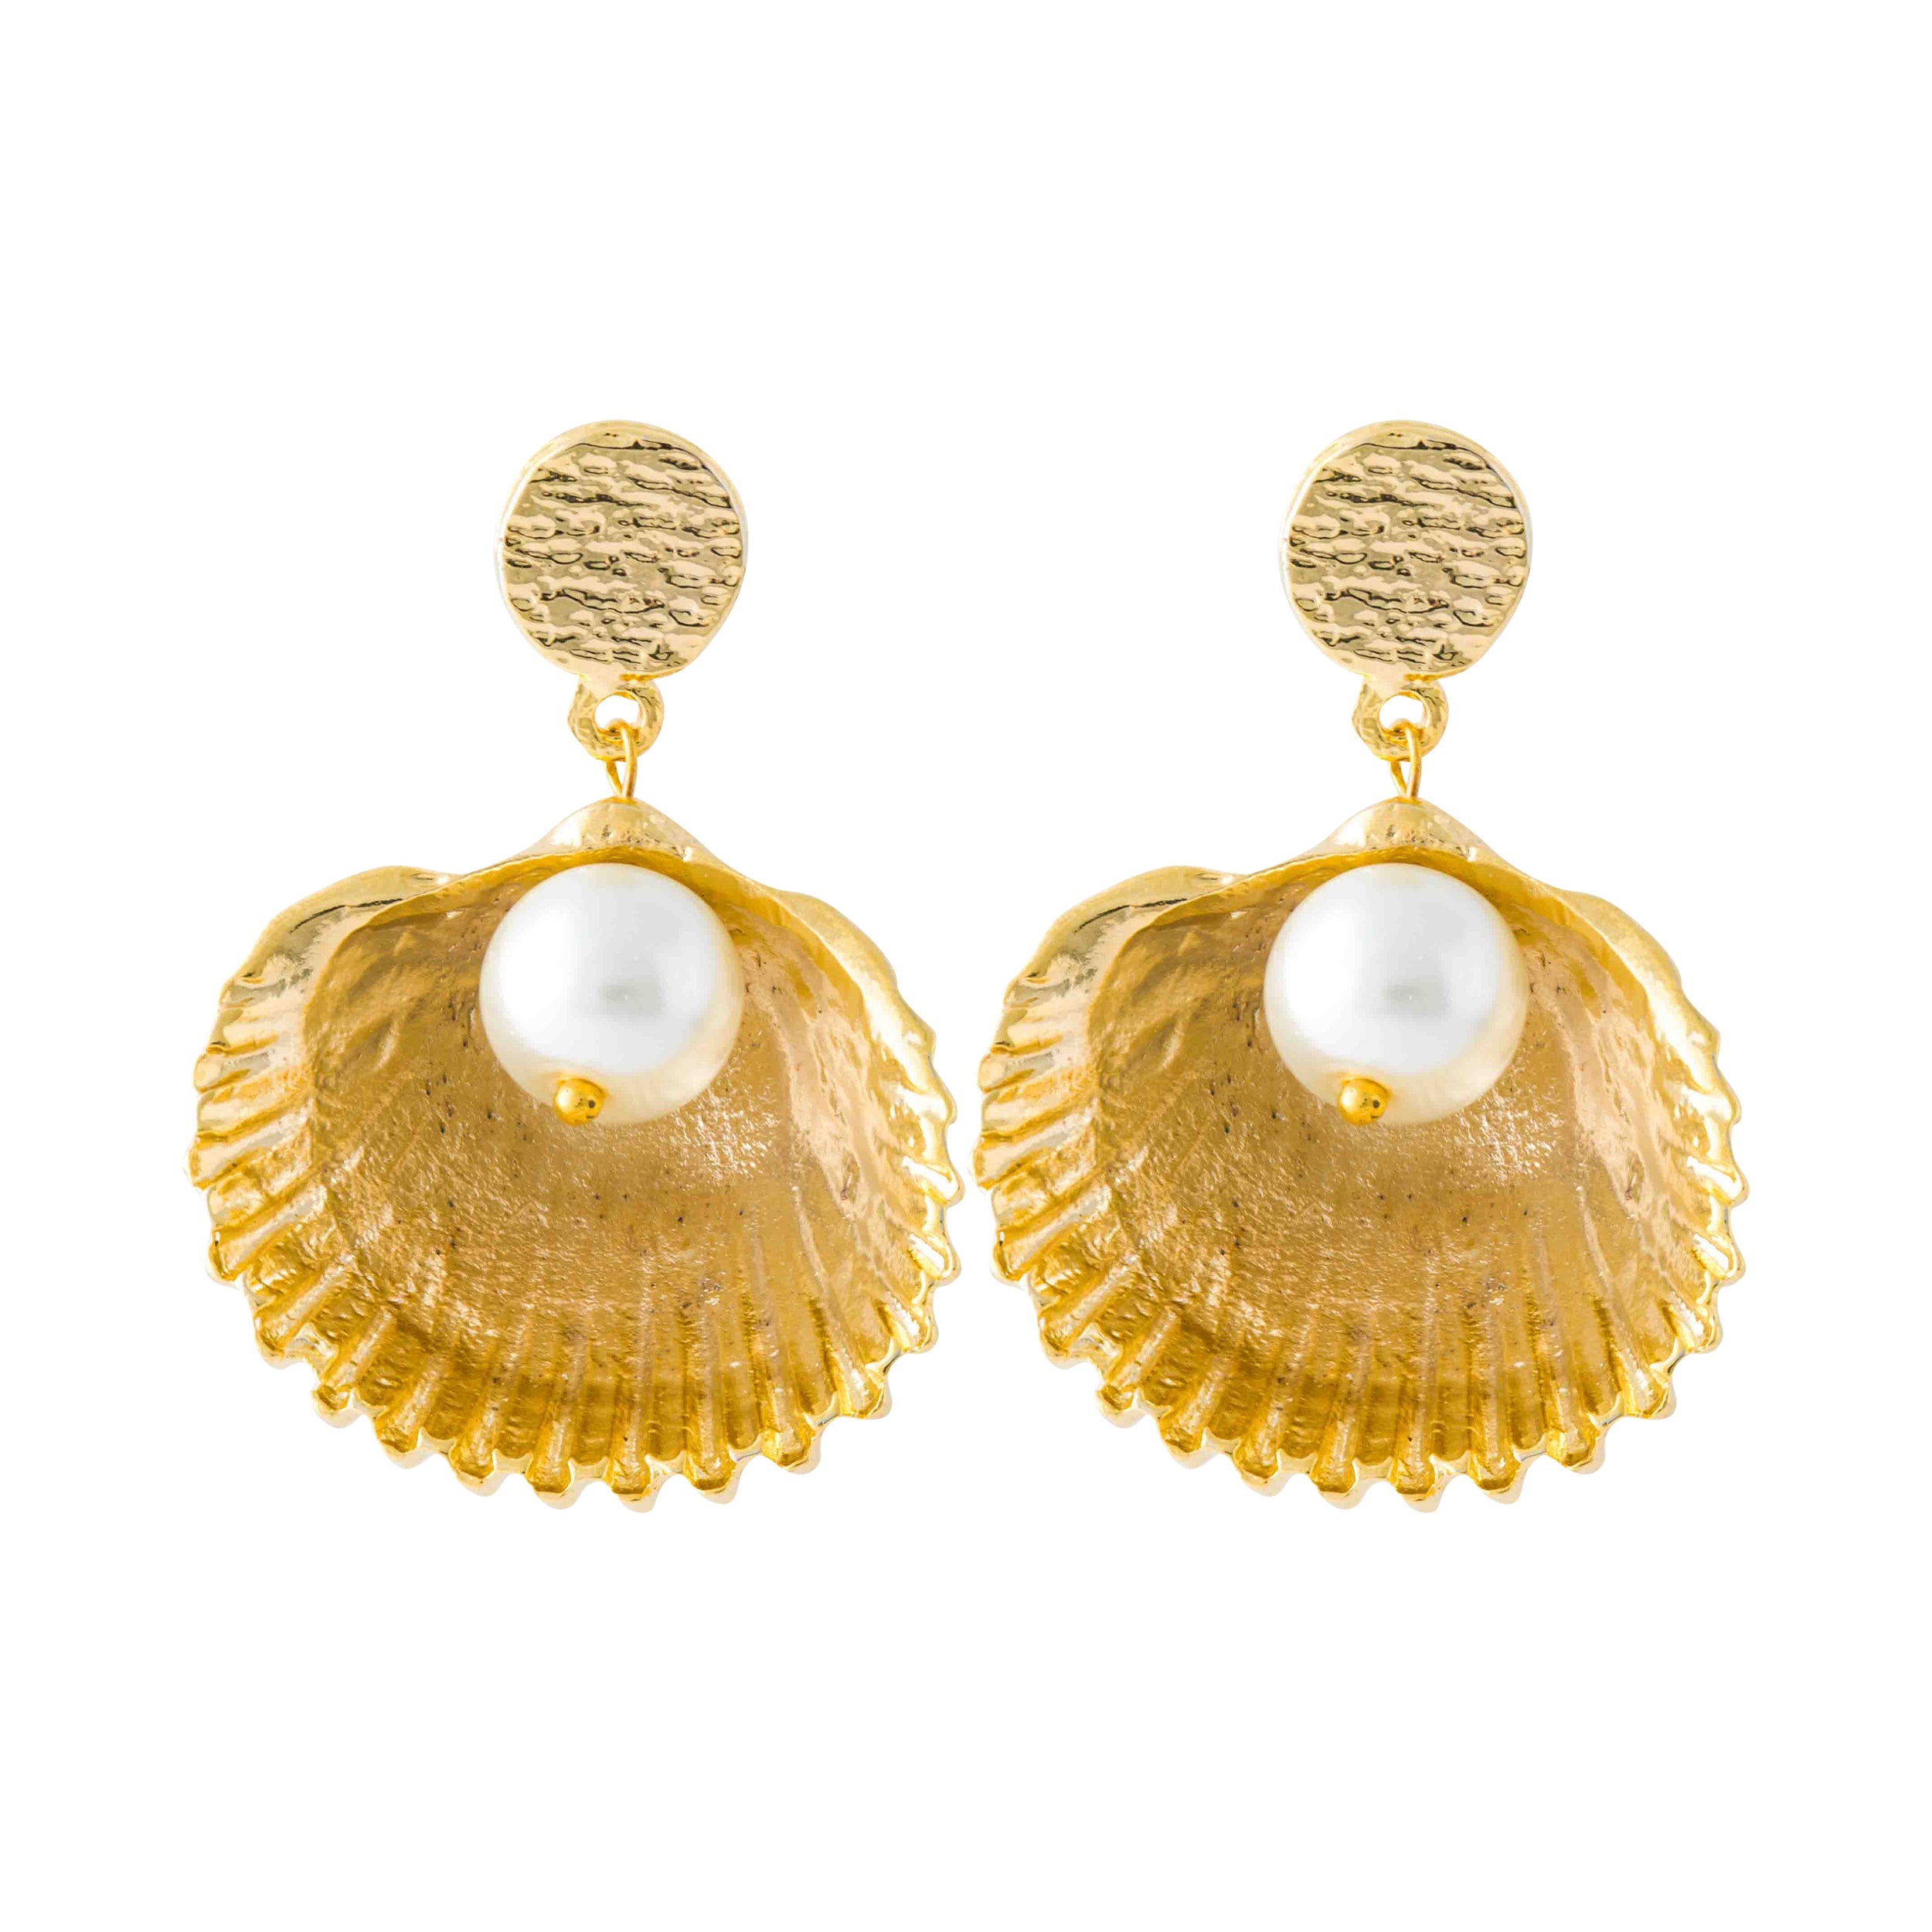 GOLD SHELL AND PEARL EARRINGS